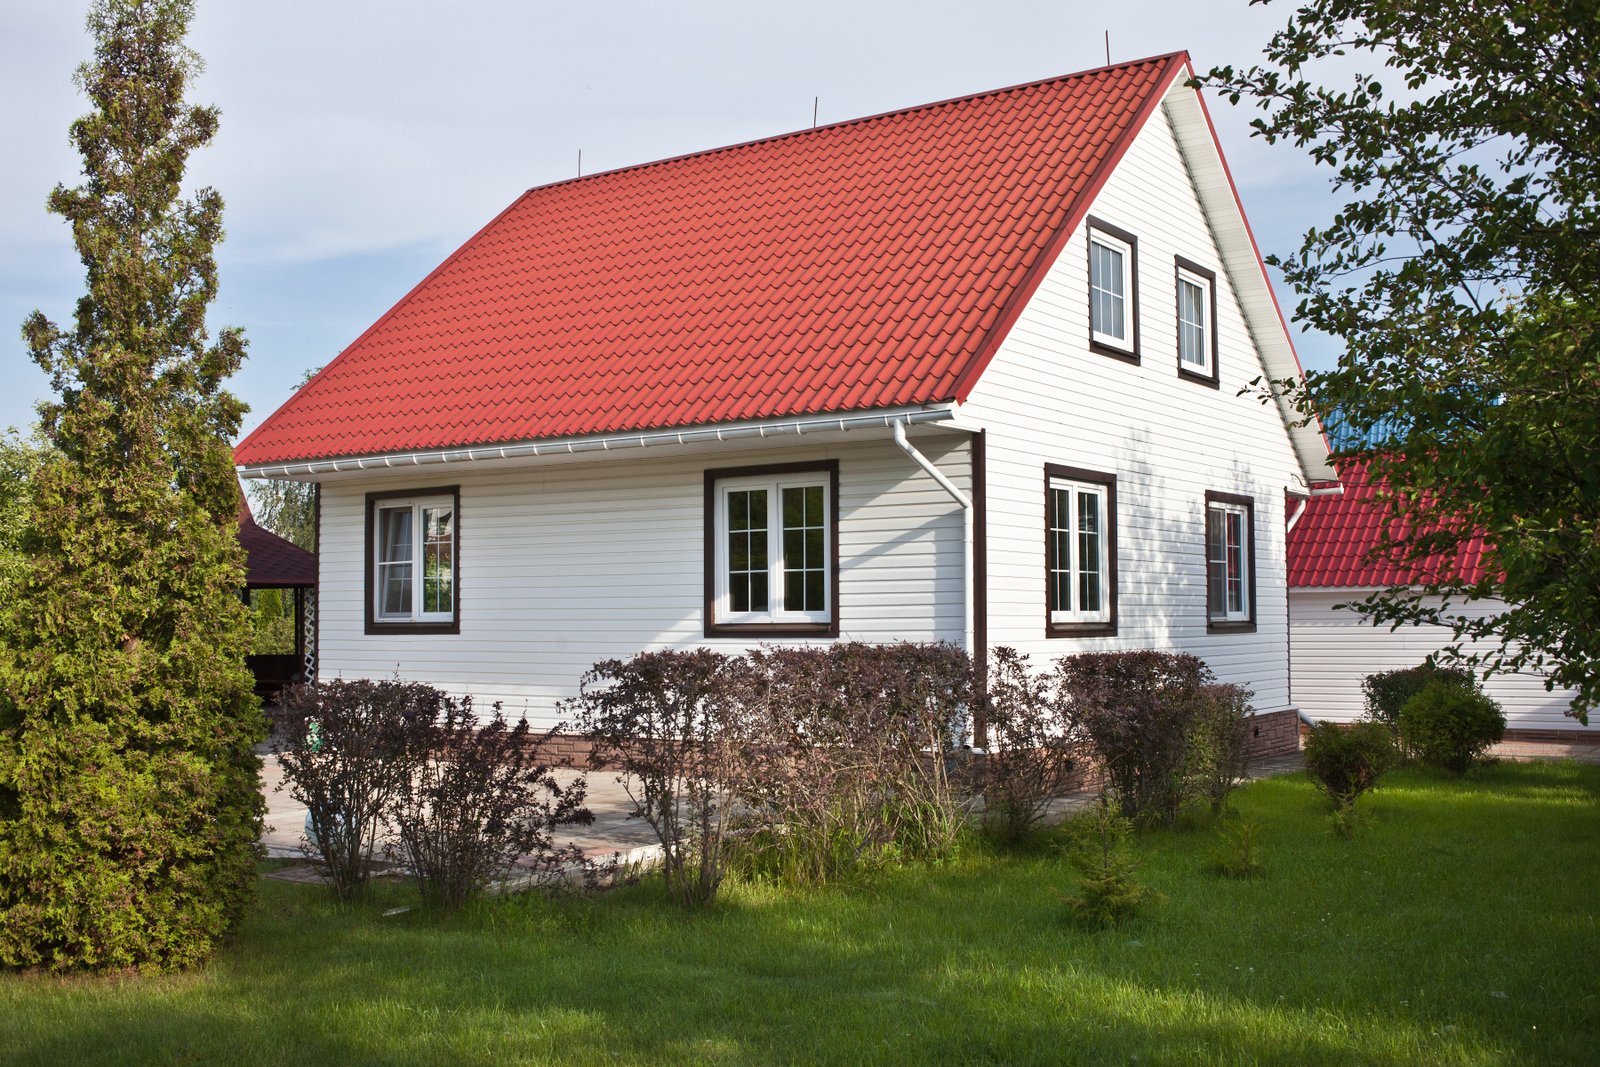 House With Red Roofs 